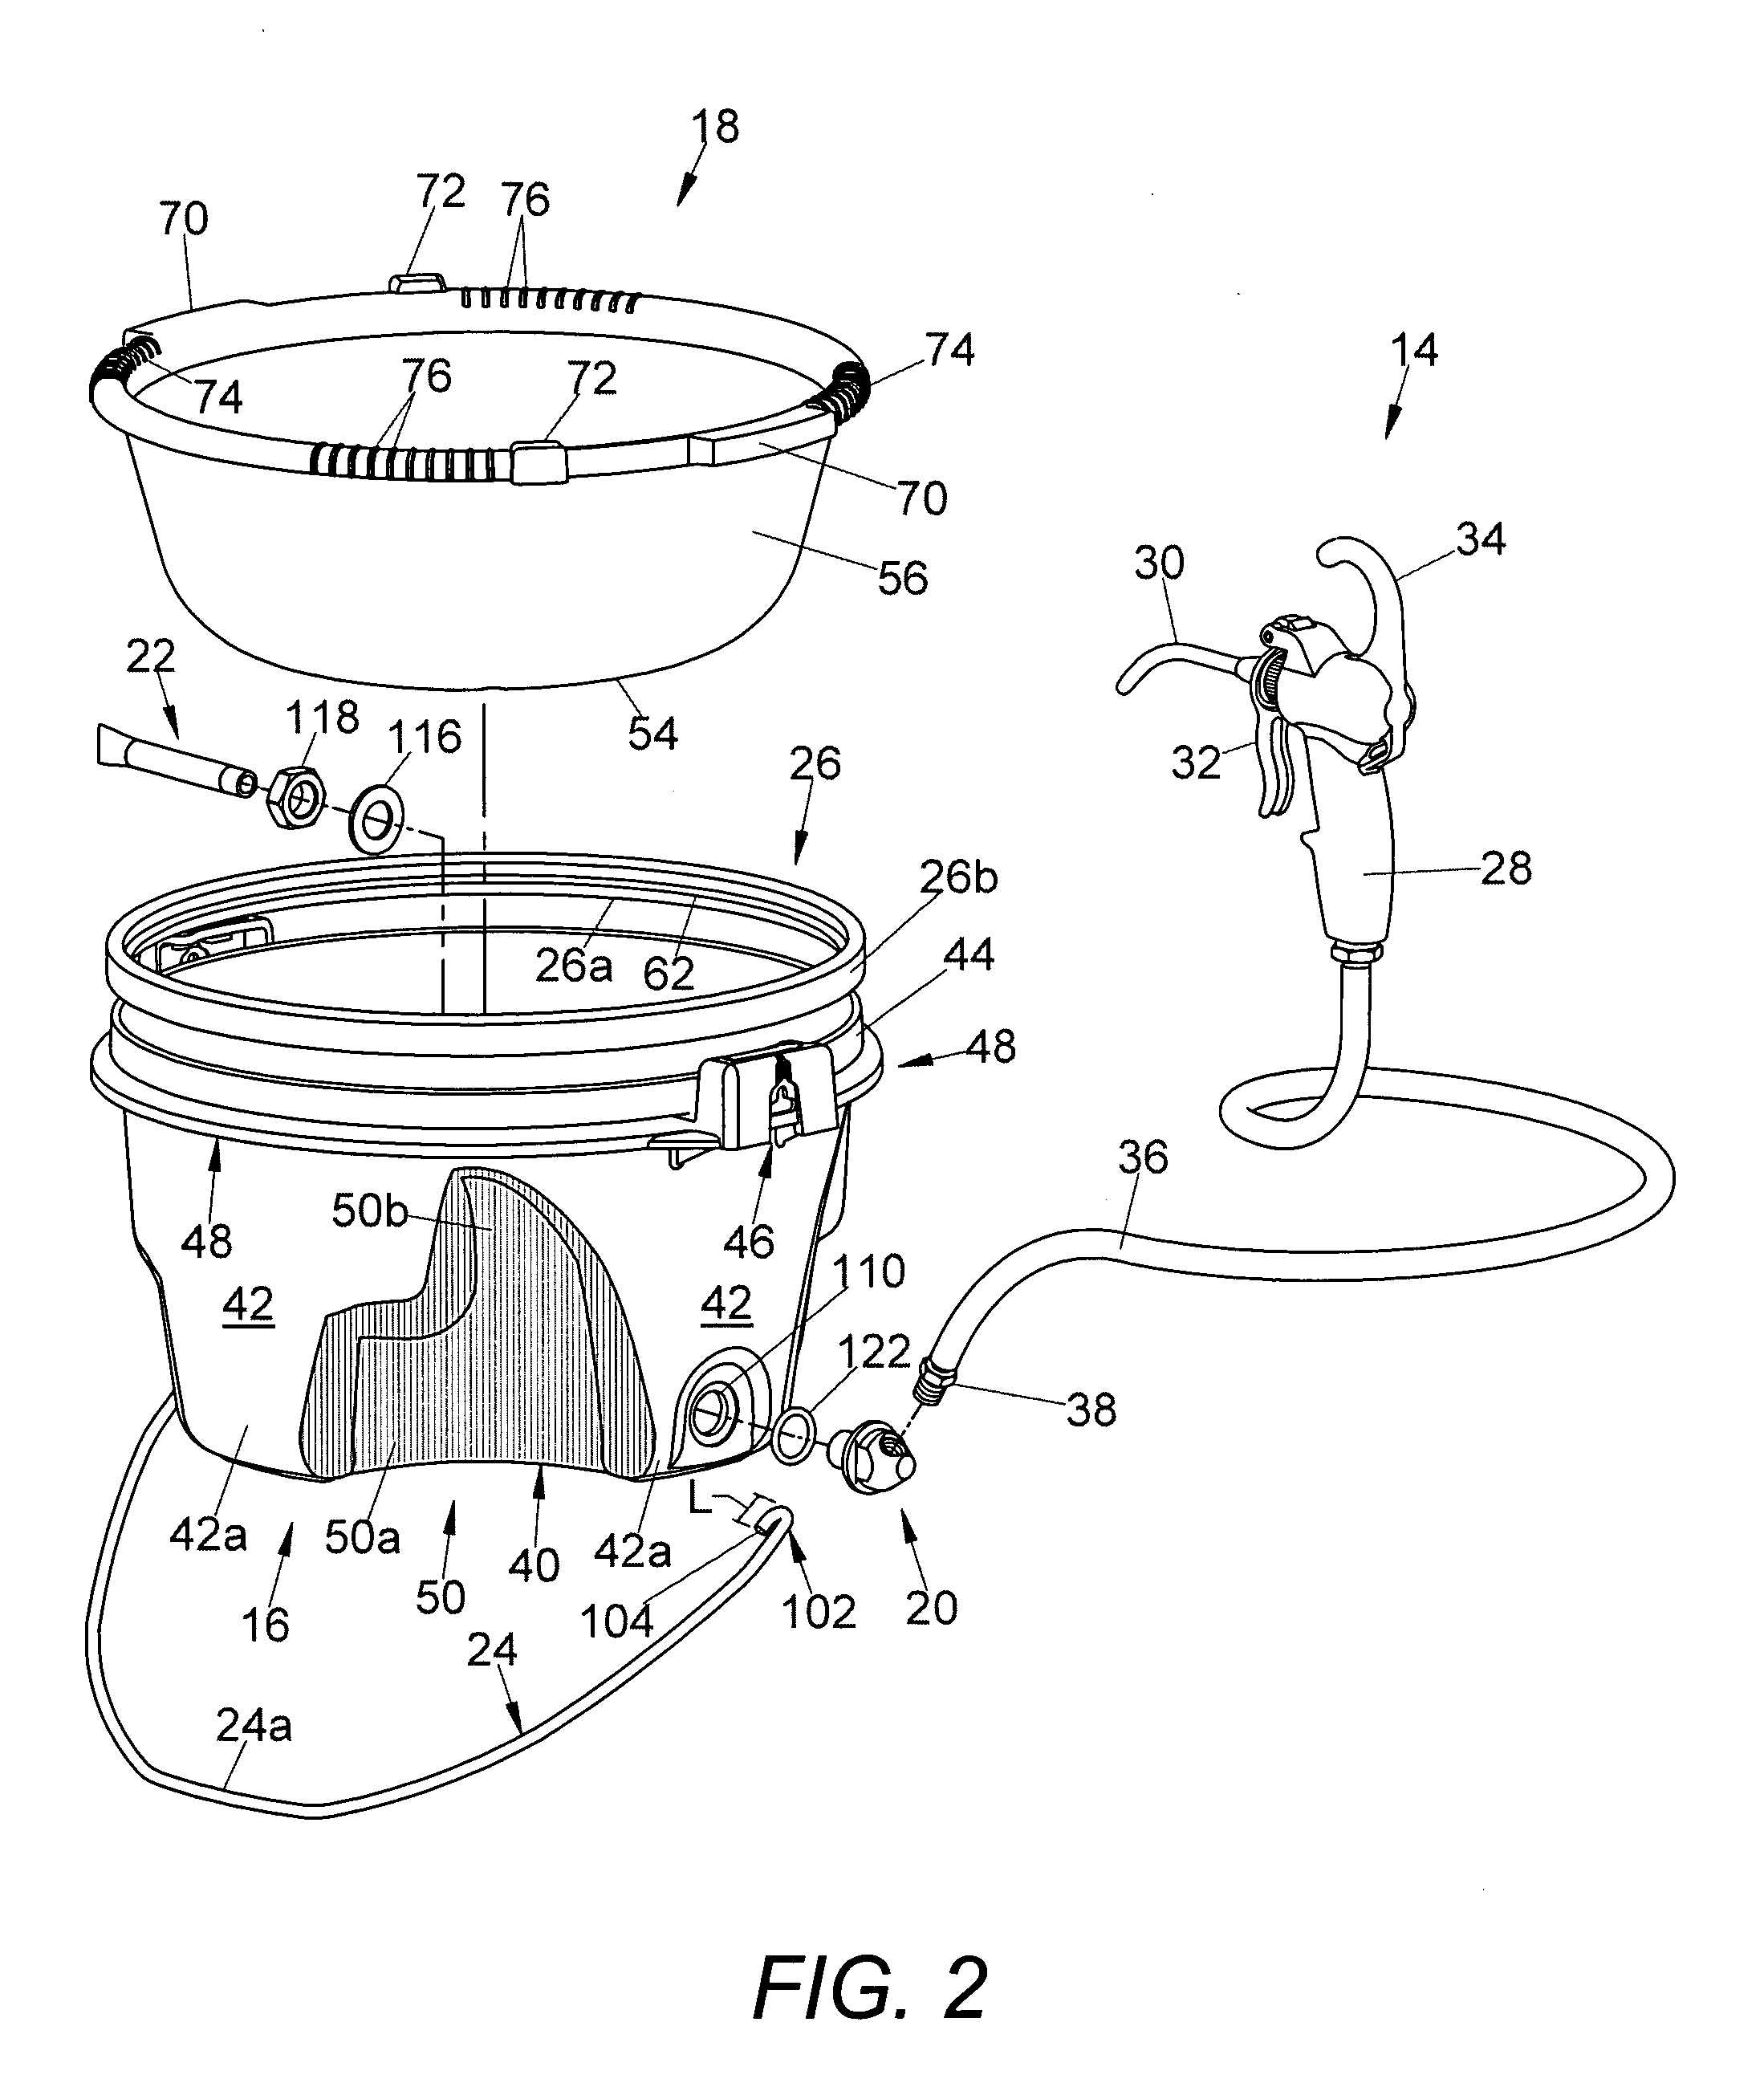 Oil container and dispenser